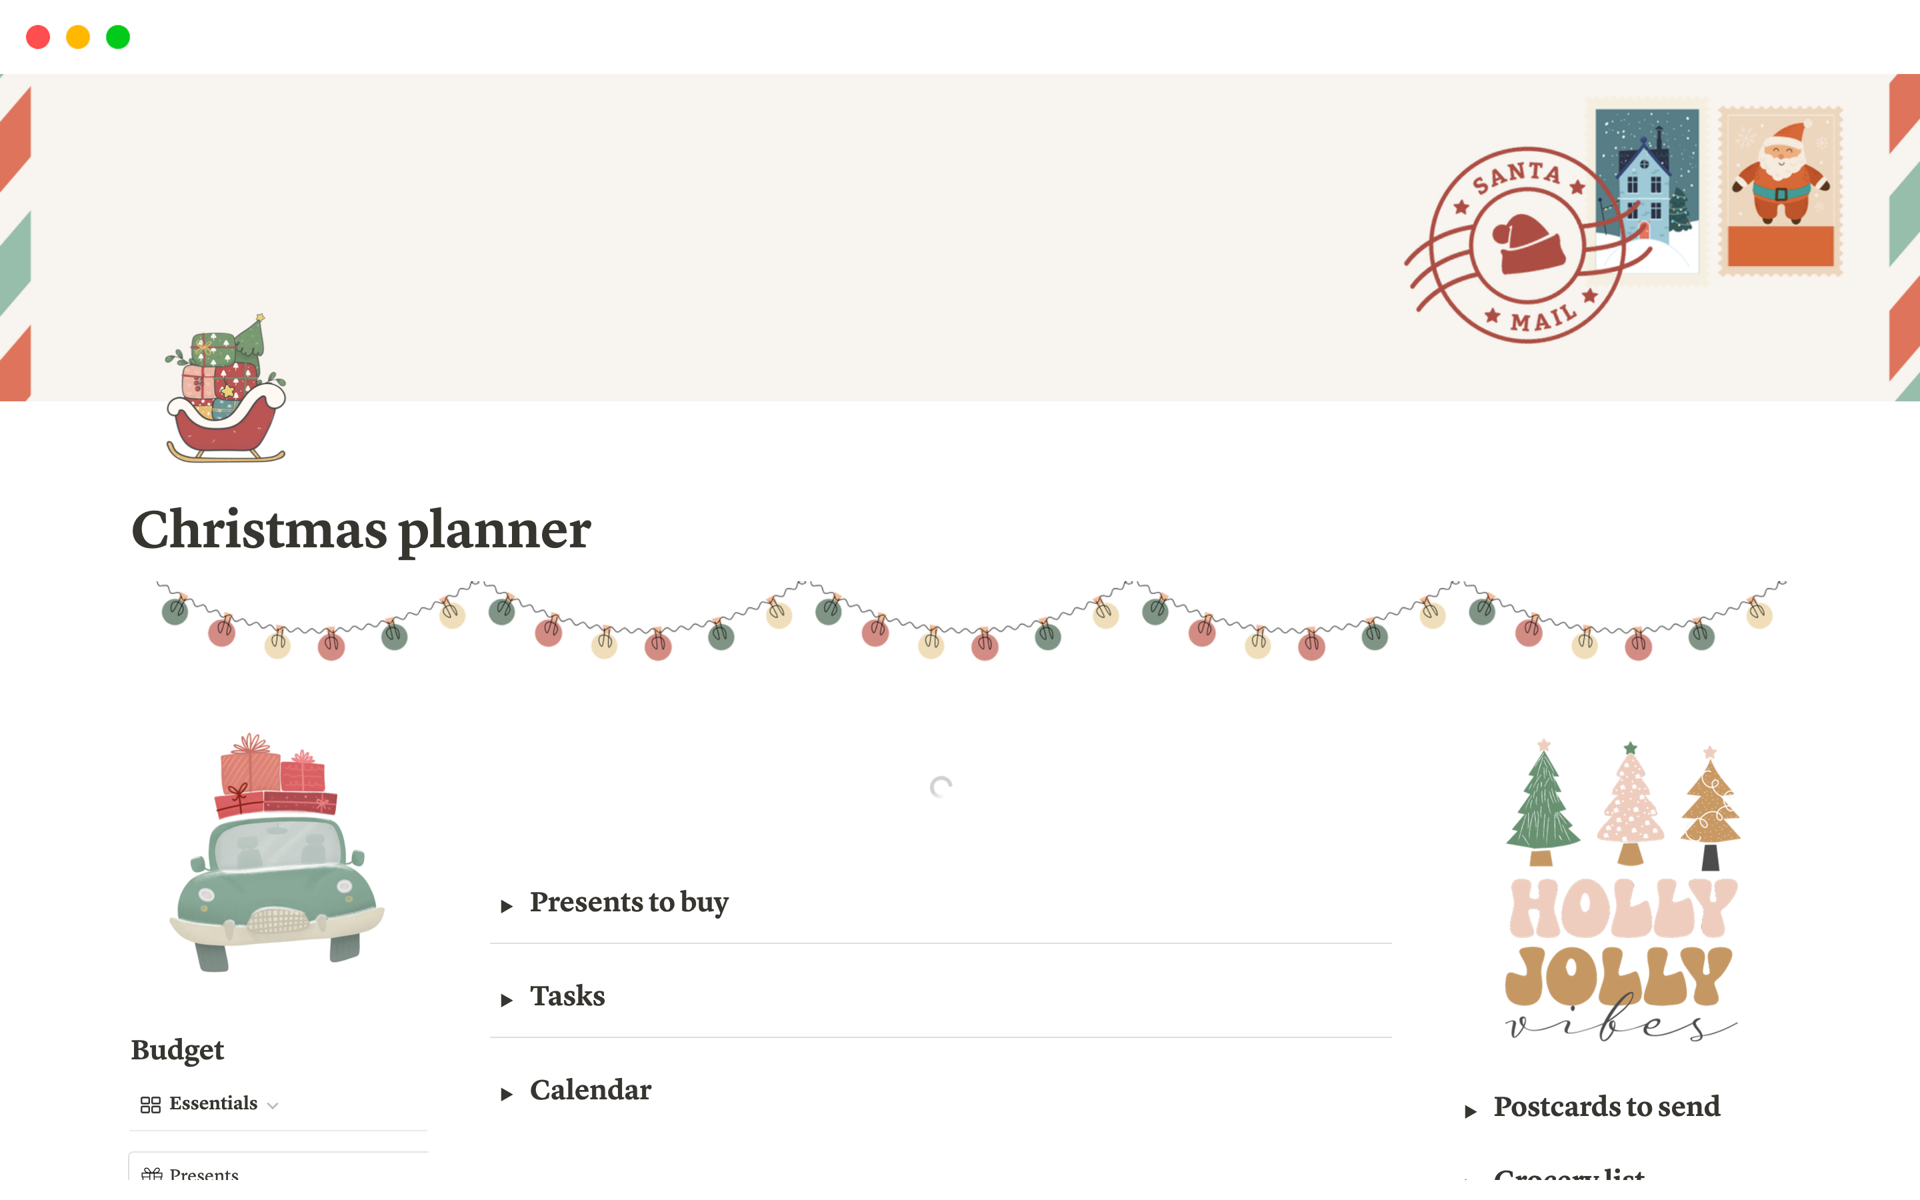 Ultimate planner to plan an unforgettable Christmas without stress 